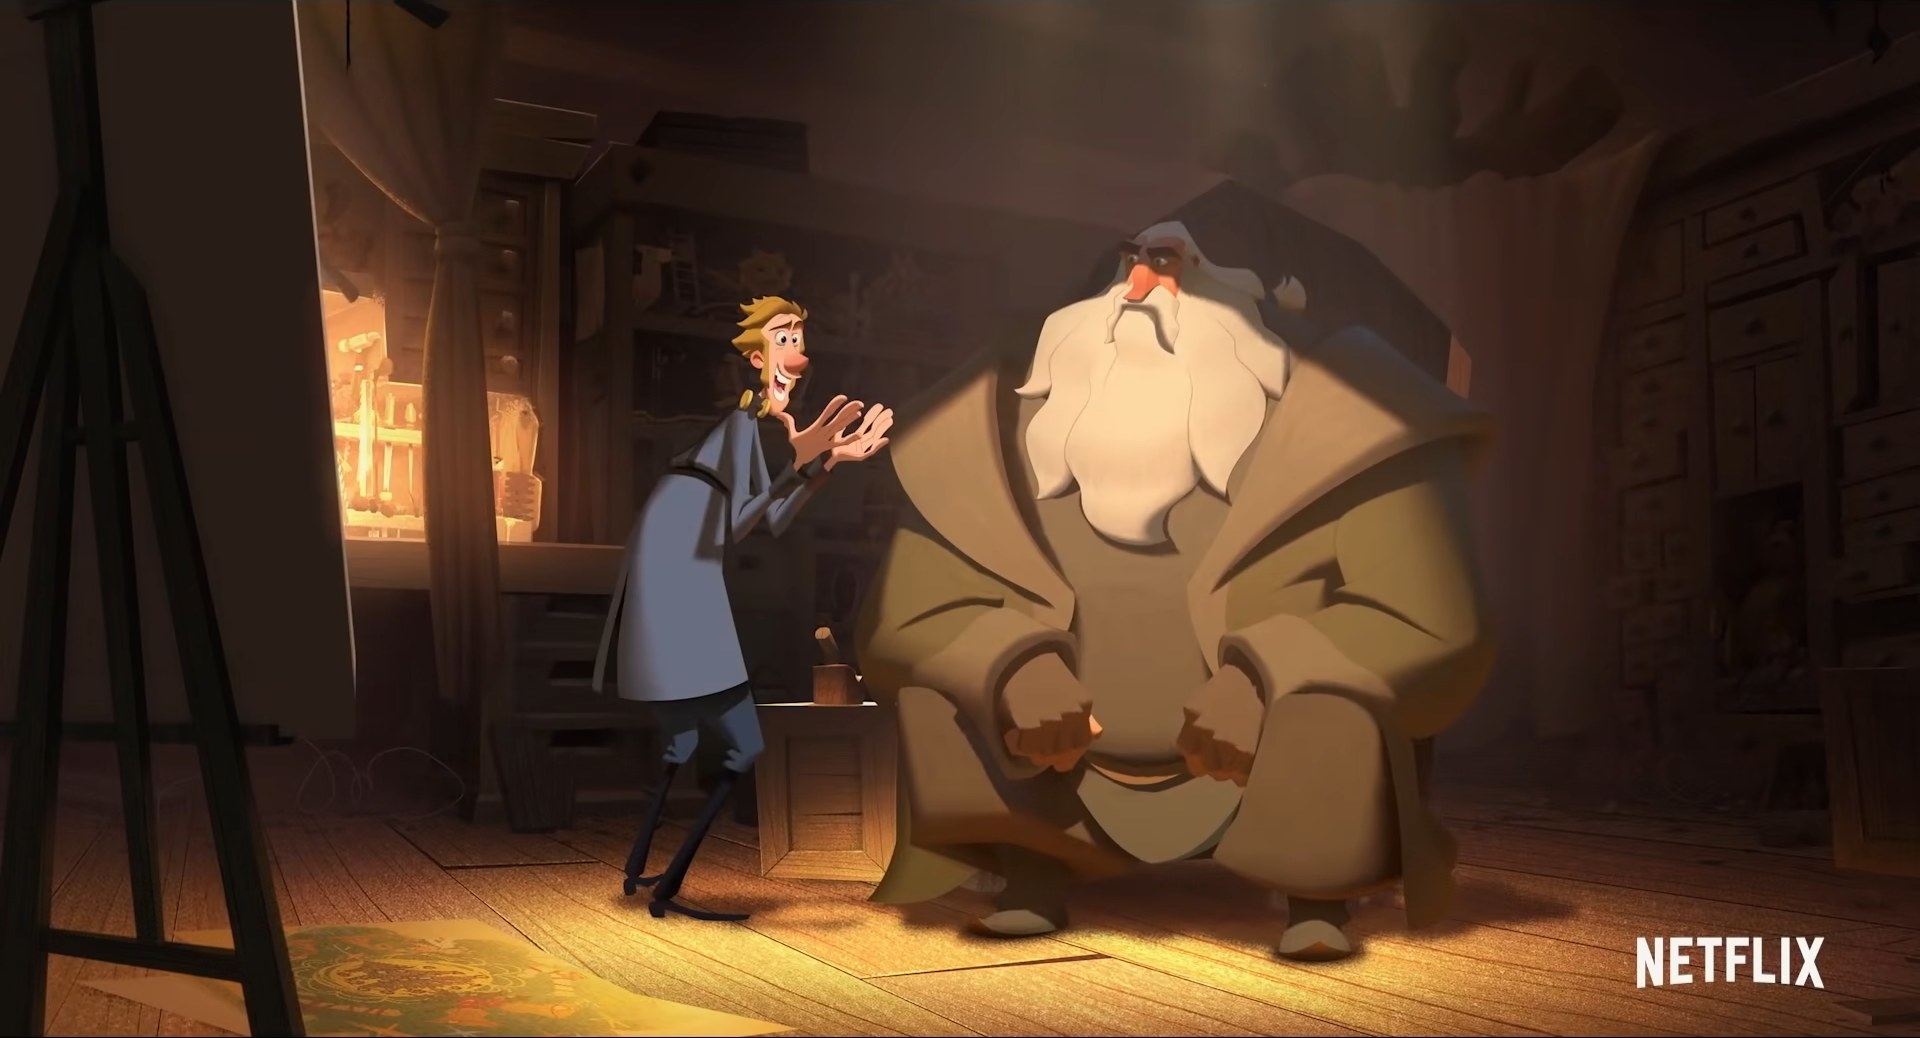 An animated man stands next to a massive animated man with flowing white beard